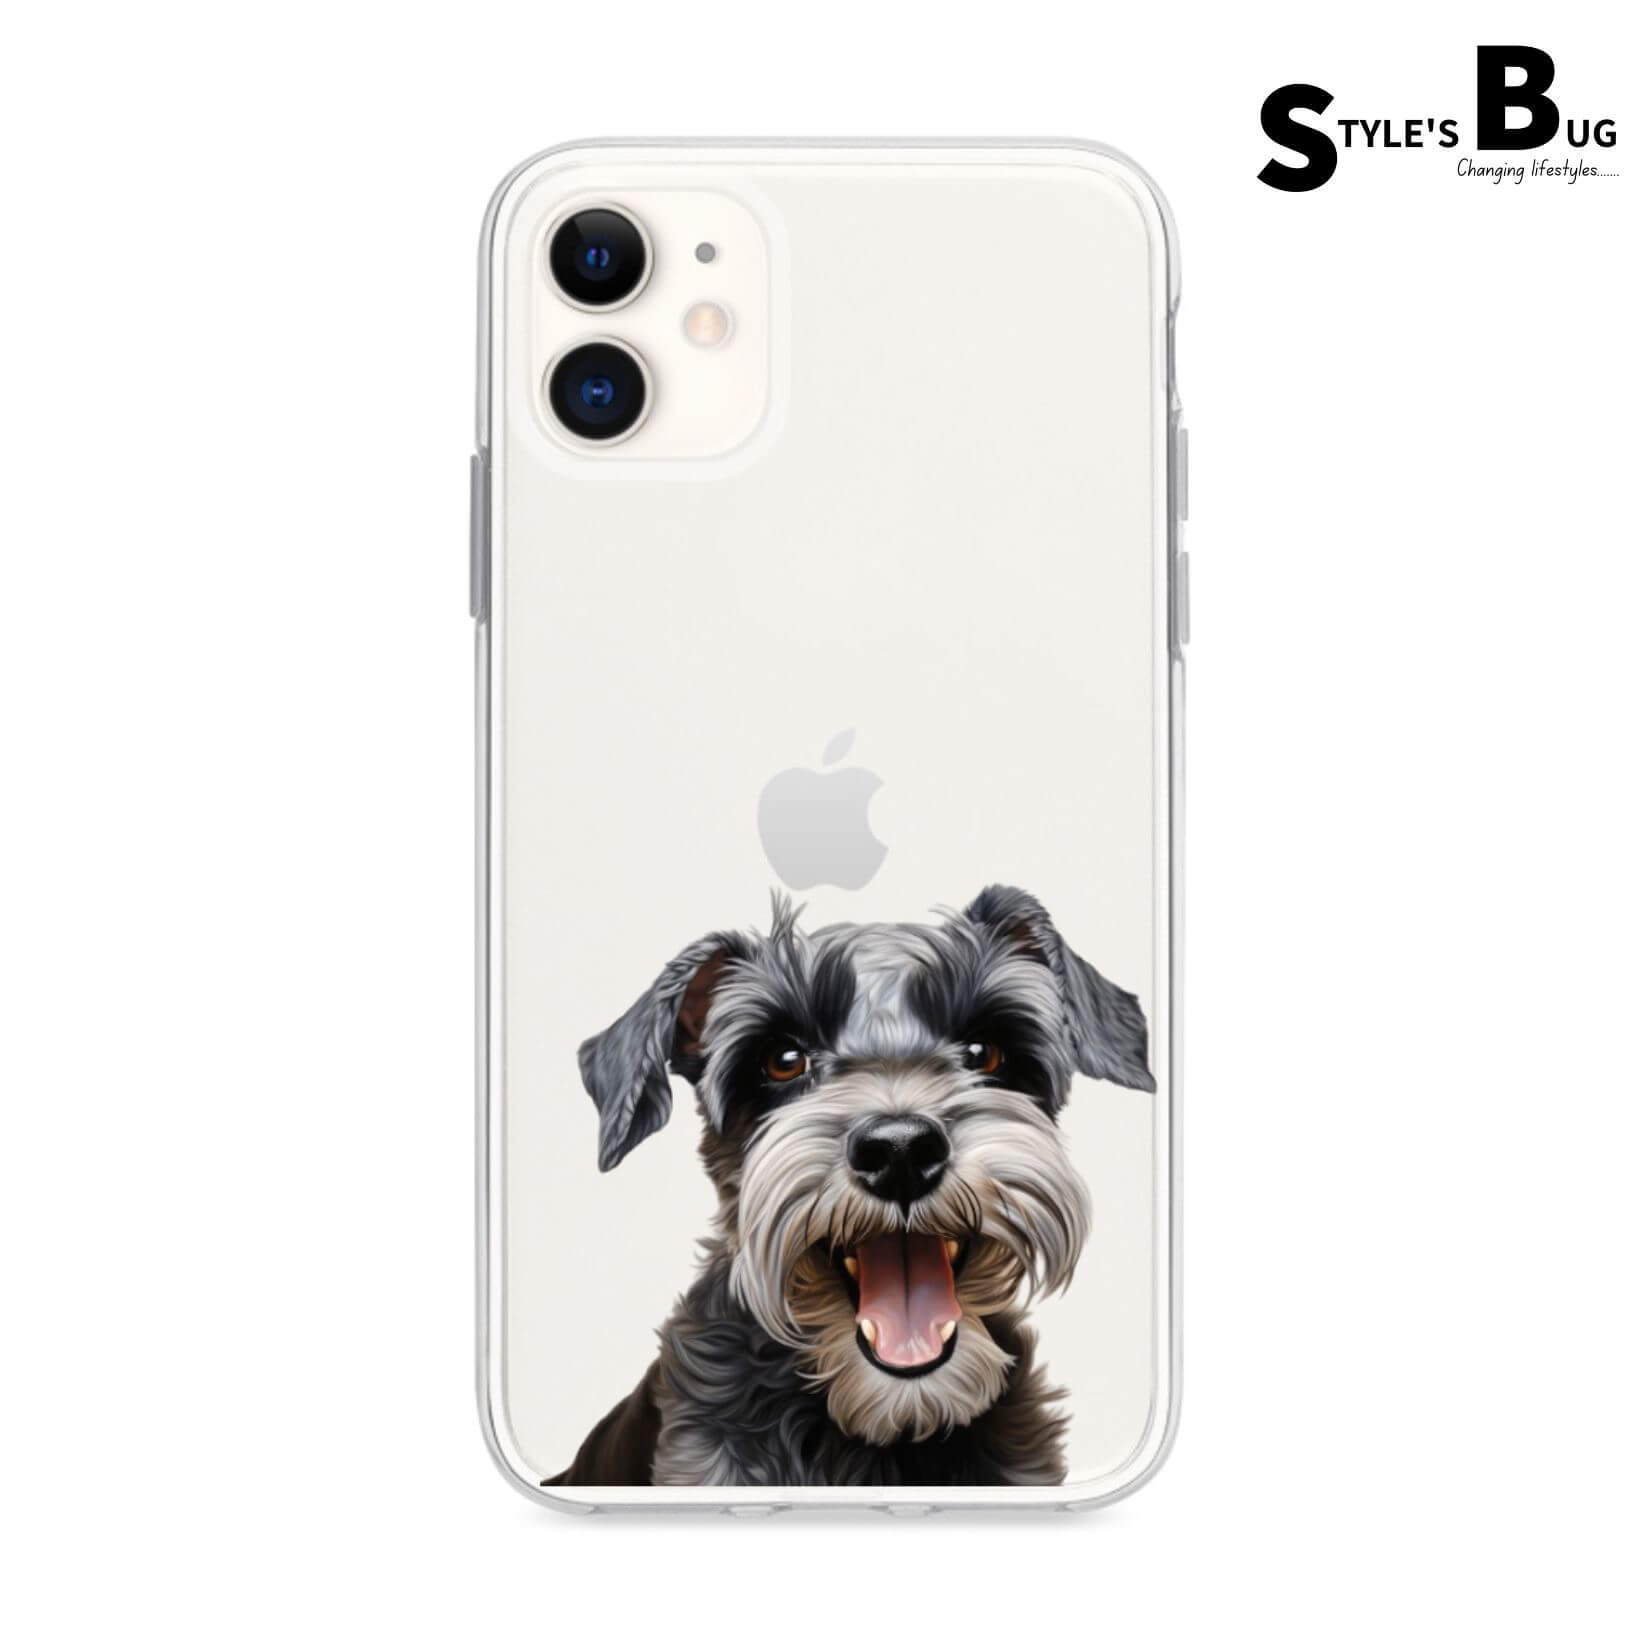 Smiling Dog phone cases from Style's Bug (UV printed) - Style's Bug Schnauzer